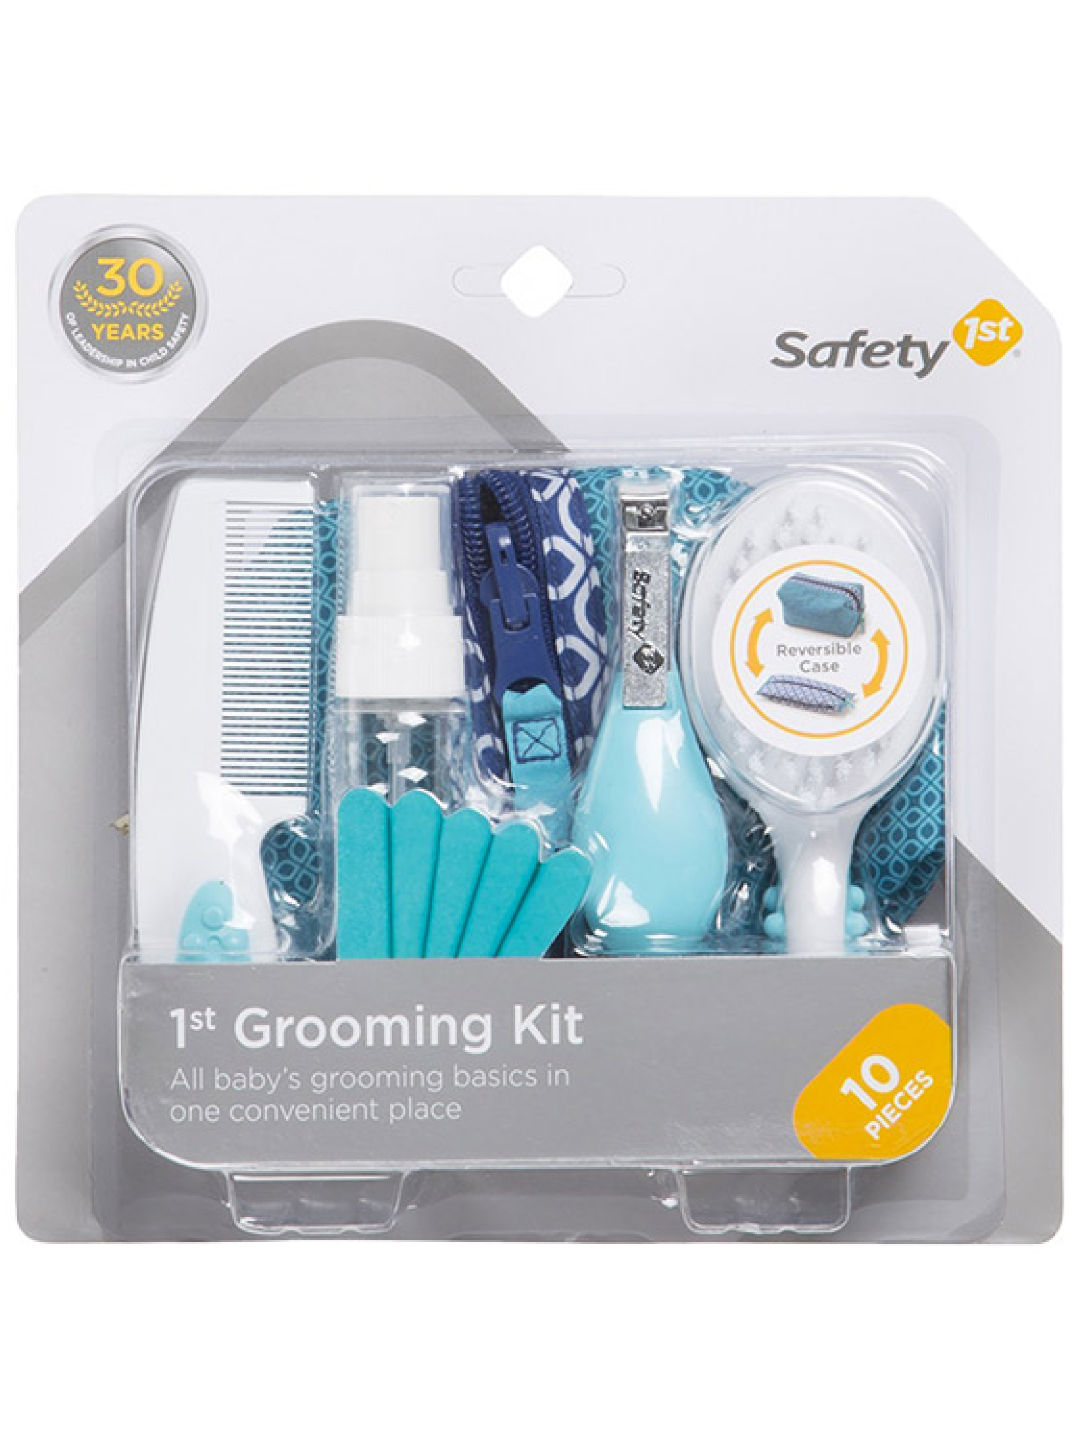 Safety 1st 1st Grooming Kit (Blue- Image 2)